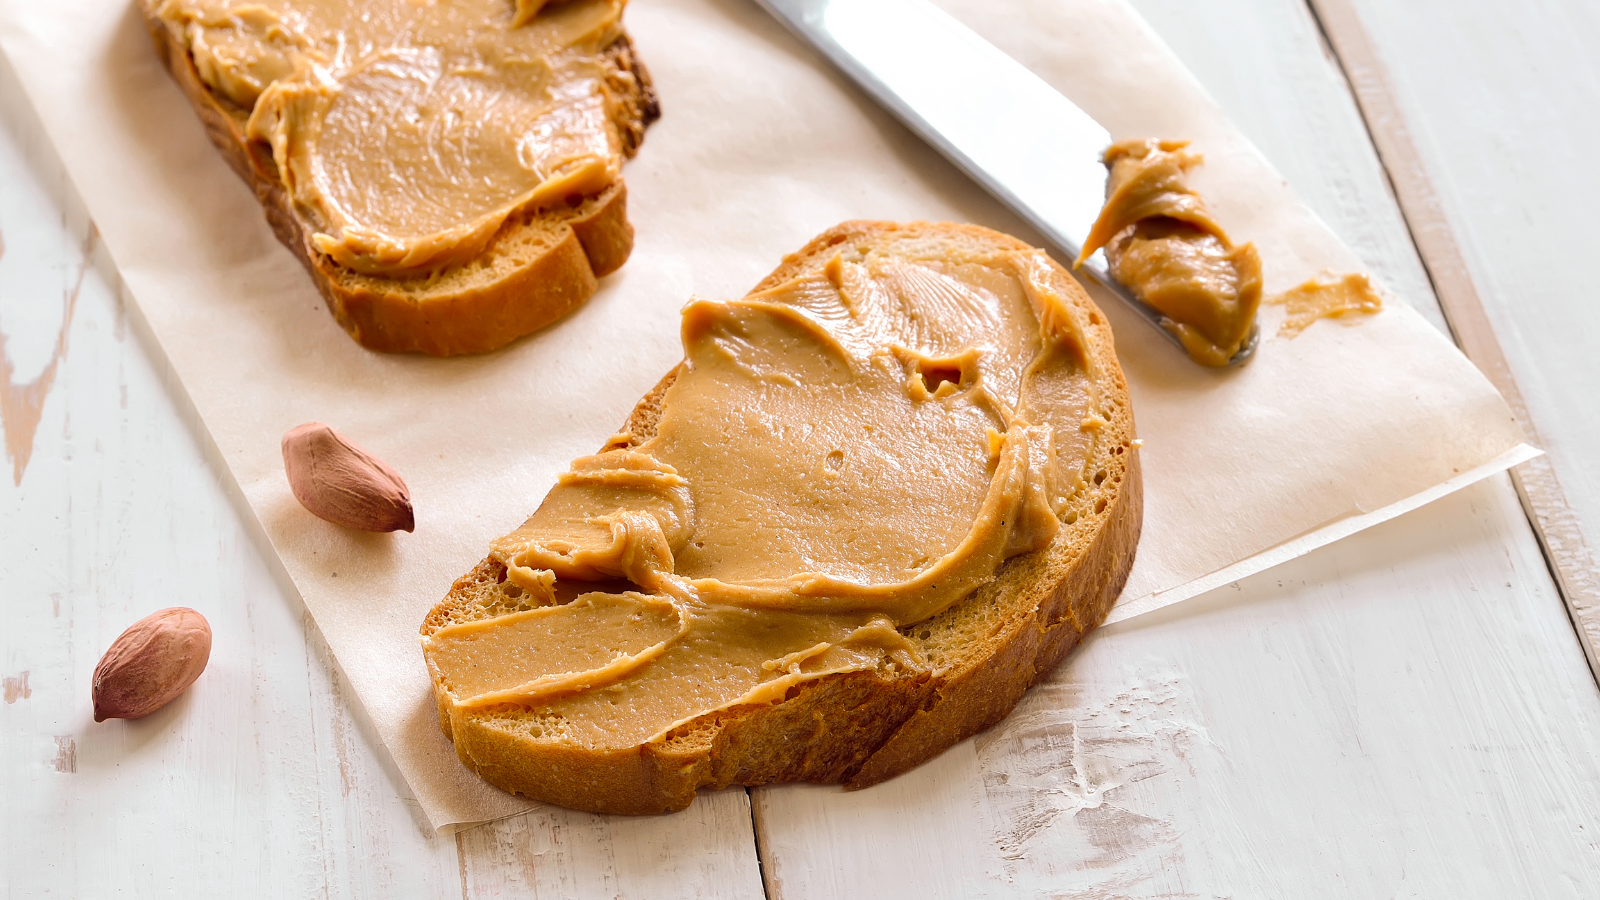 Does Peanut Butter Go Bad?